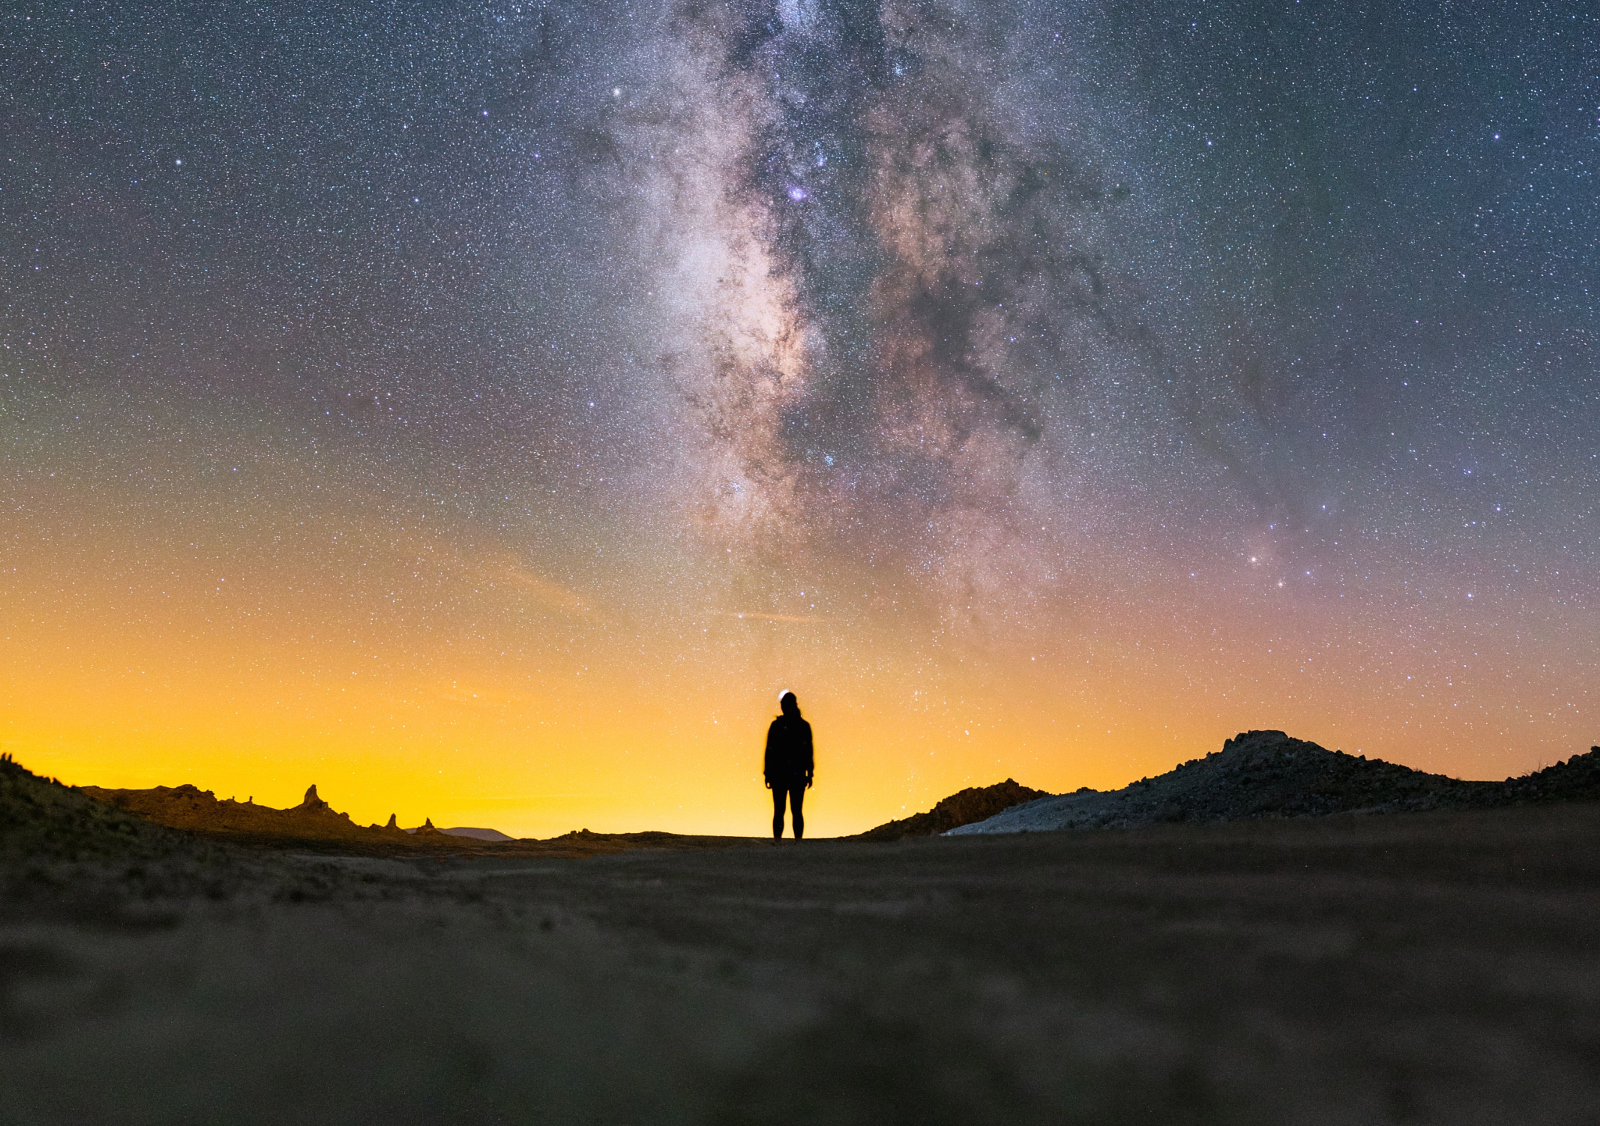 Video: How to Process a Milky Way Photo in Adobe Lightroom